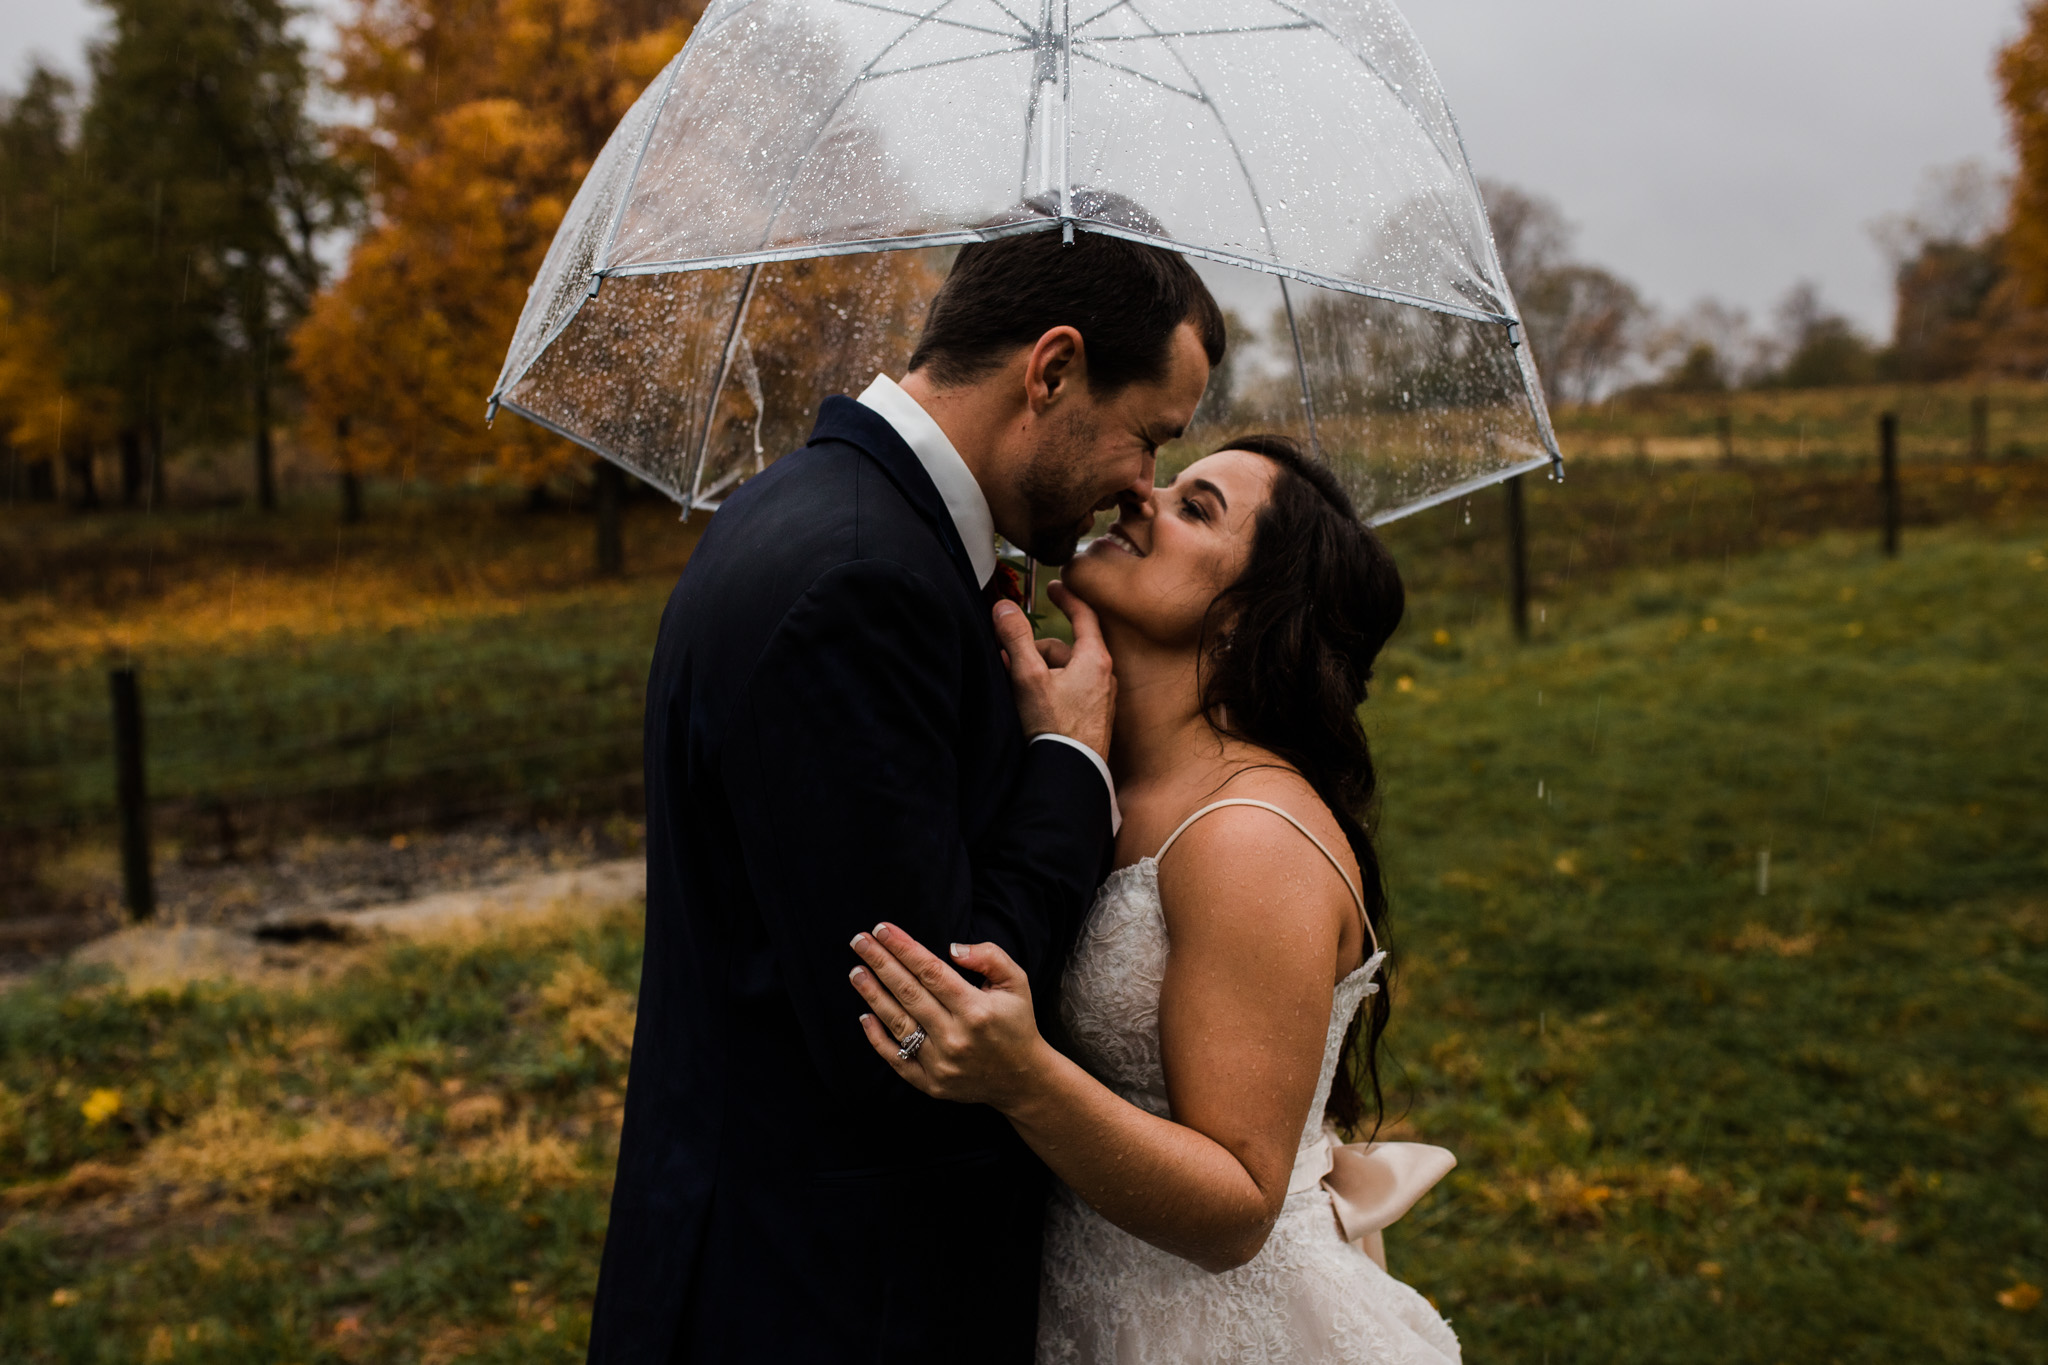 An intimate moment in the rain during this October bison ranch wedding.